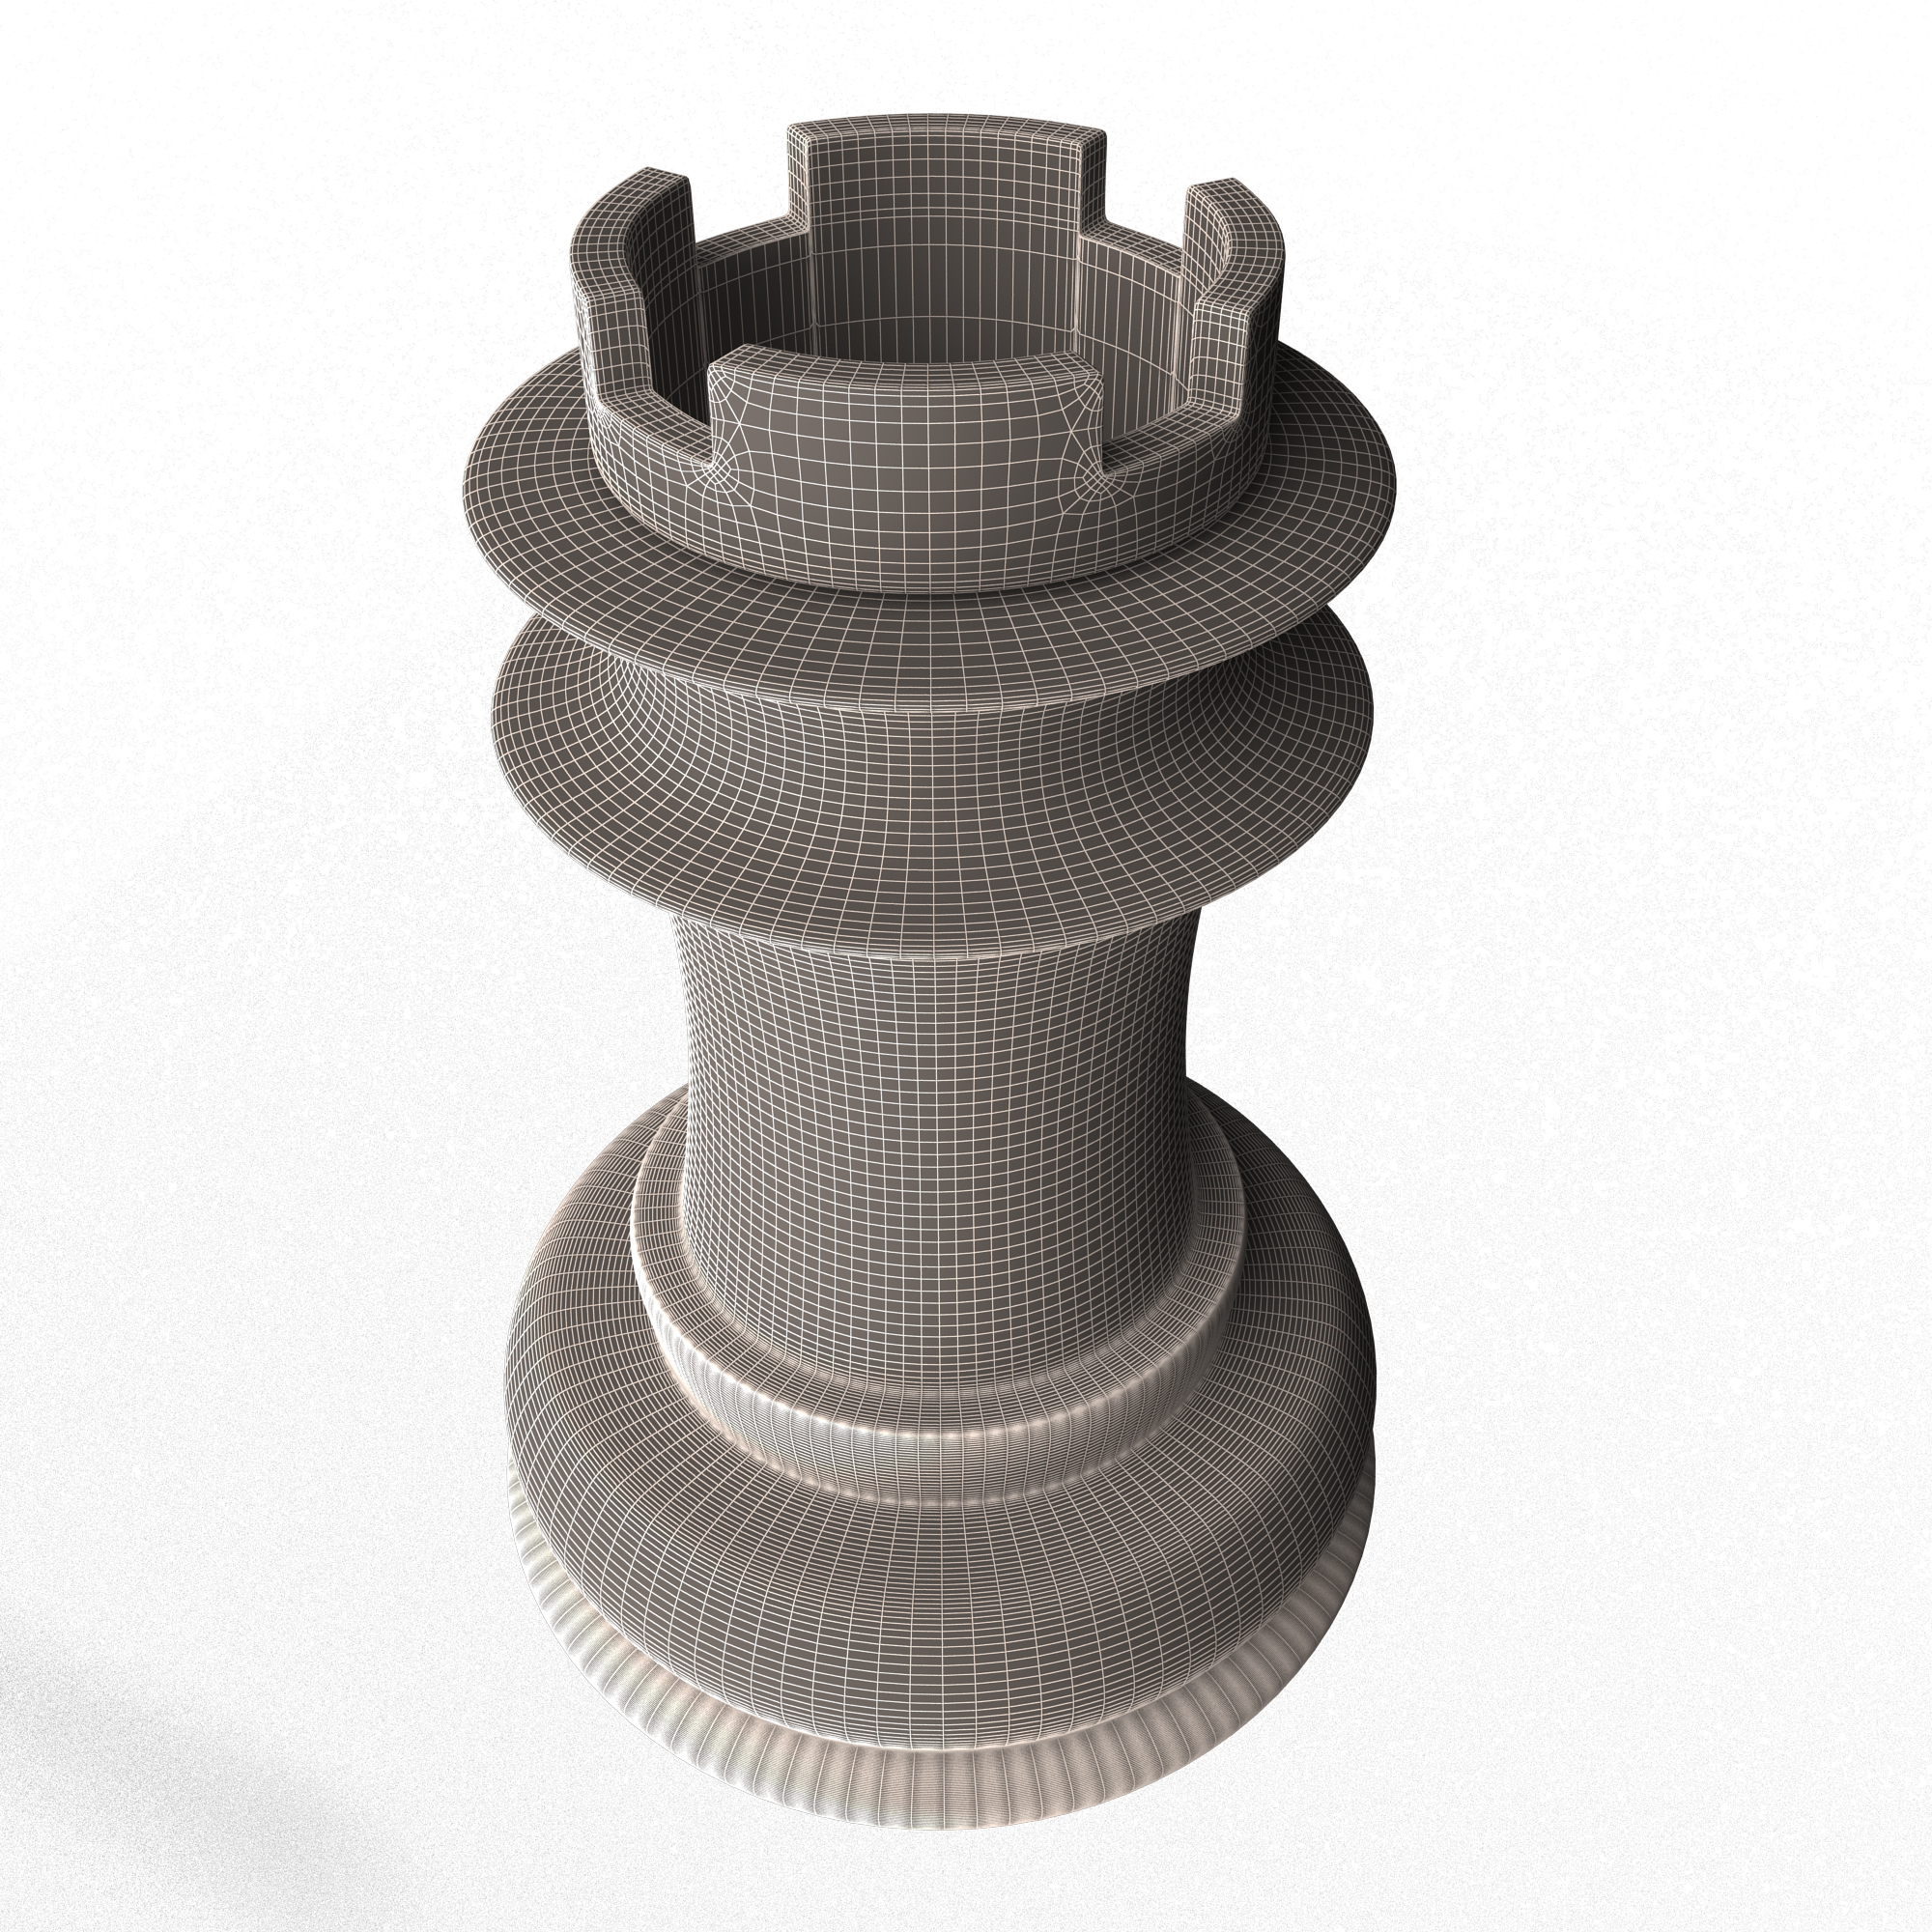 Chess Piece - Rook, 3D CAD Model Library